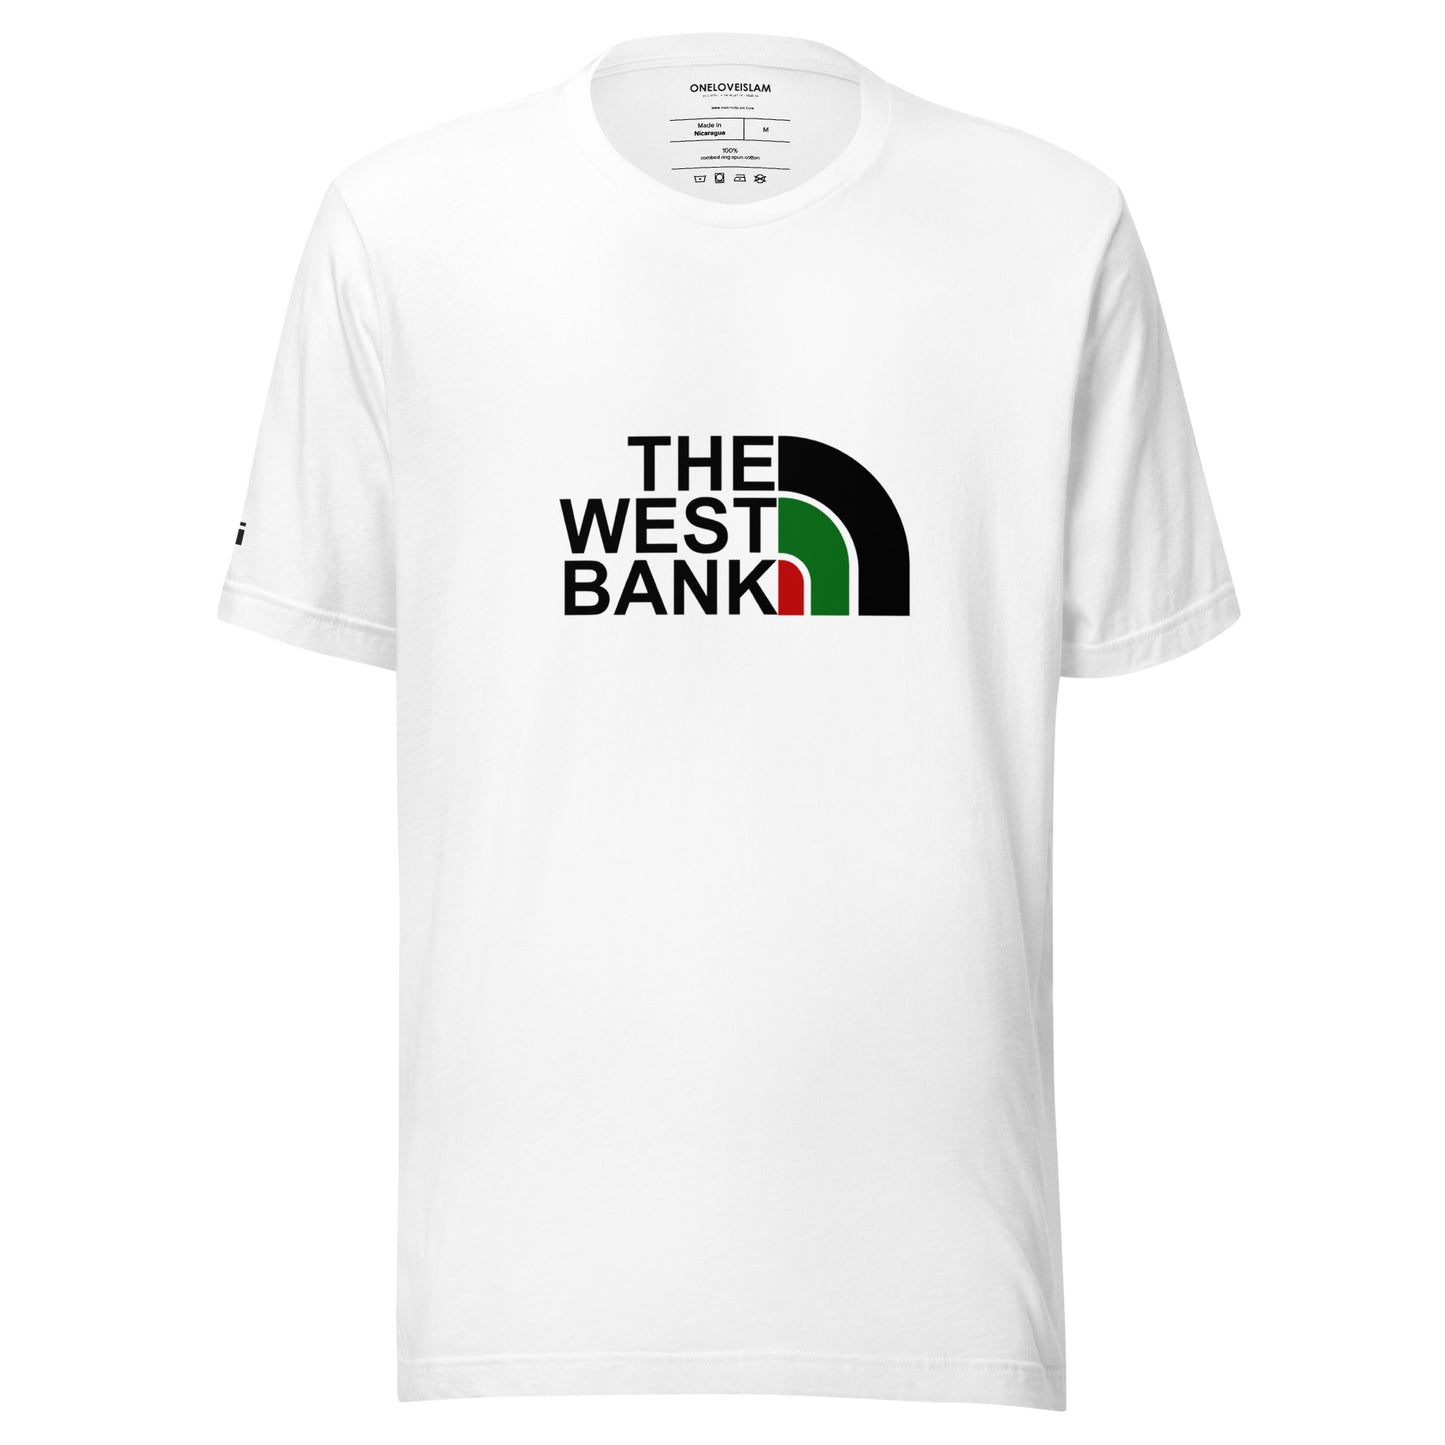 The West Bank T